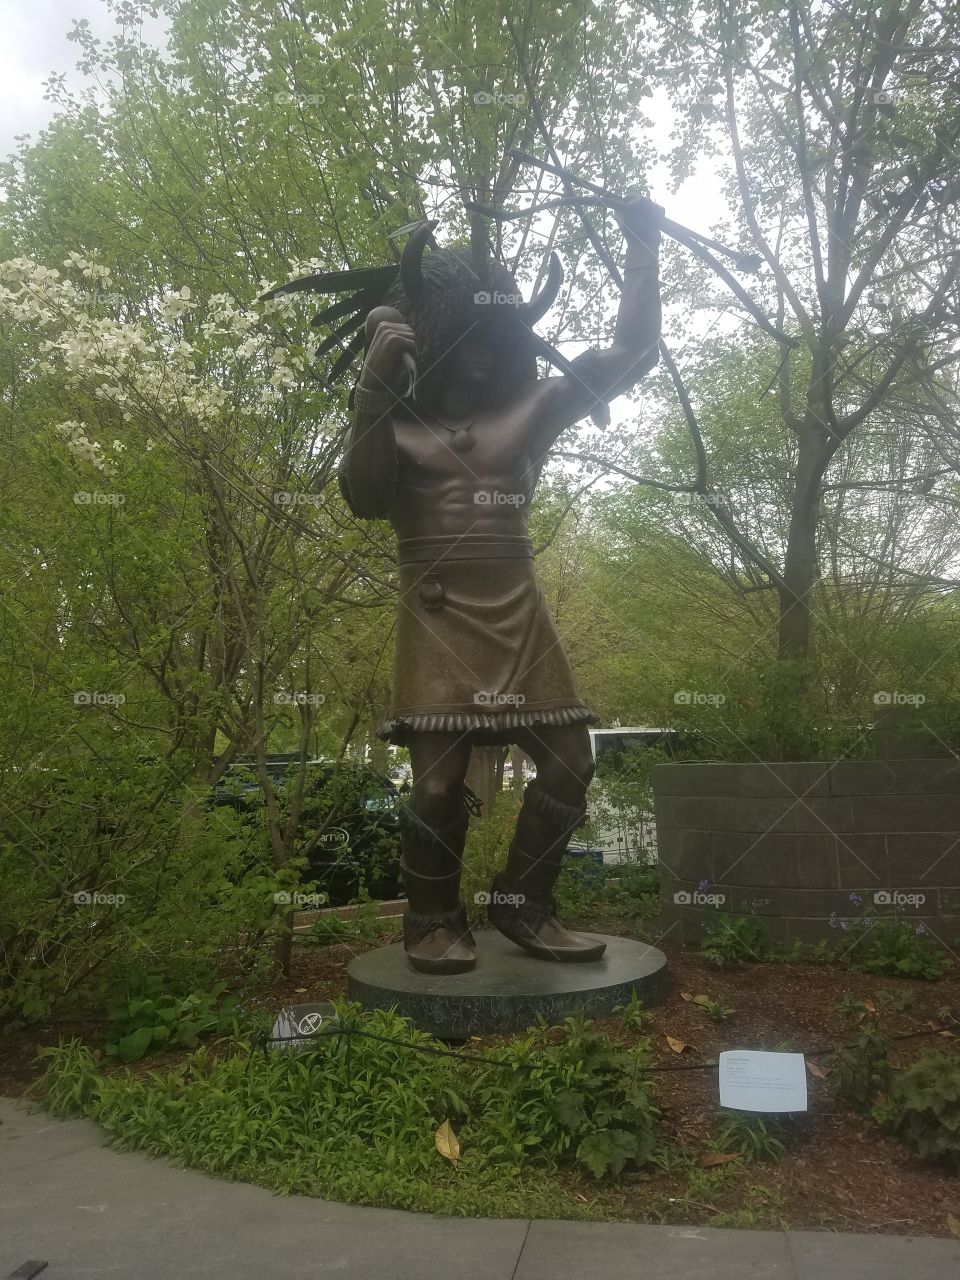 A Native American statue depicting him in a warrior stance. The statue is surrounded by forestry.